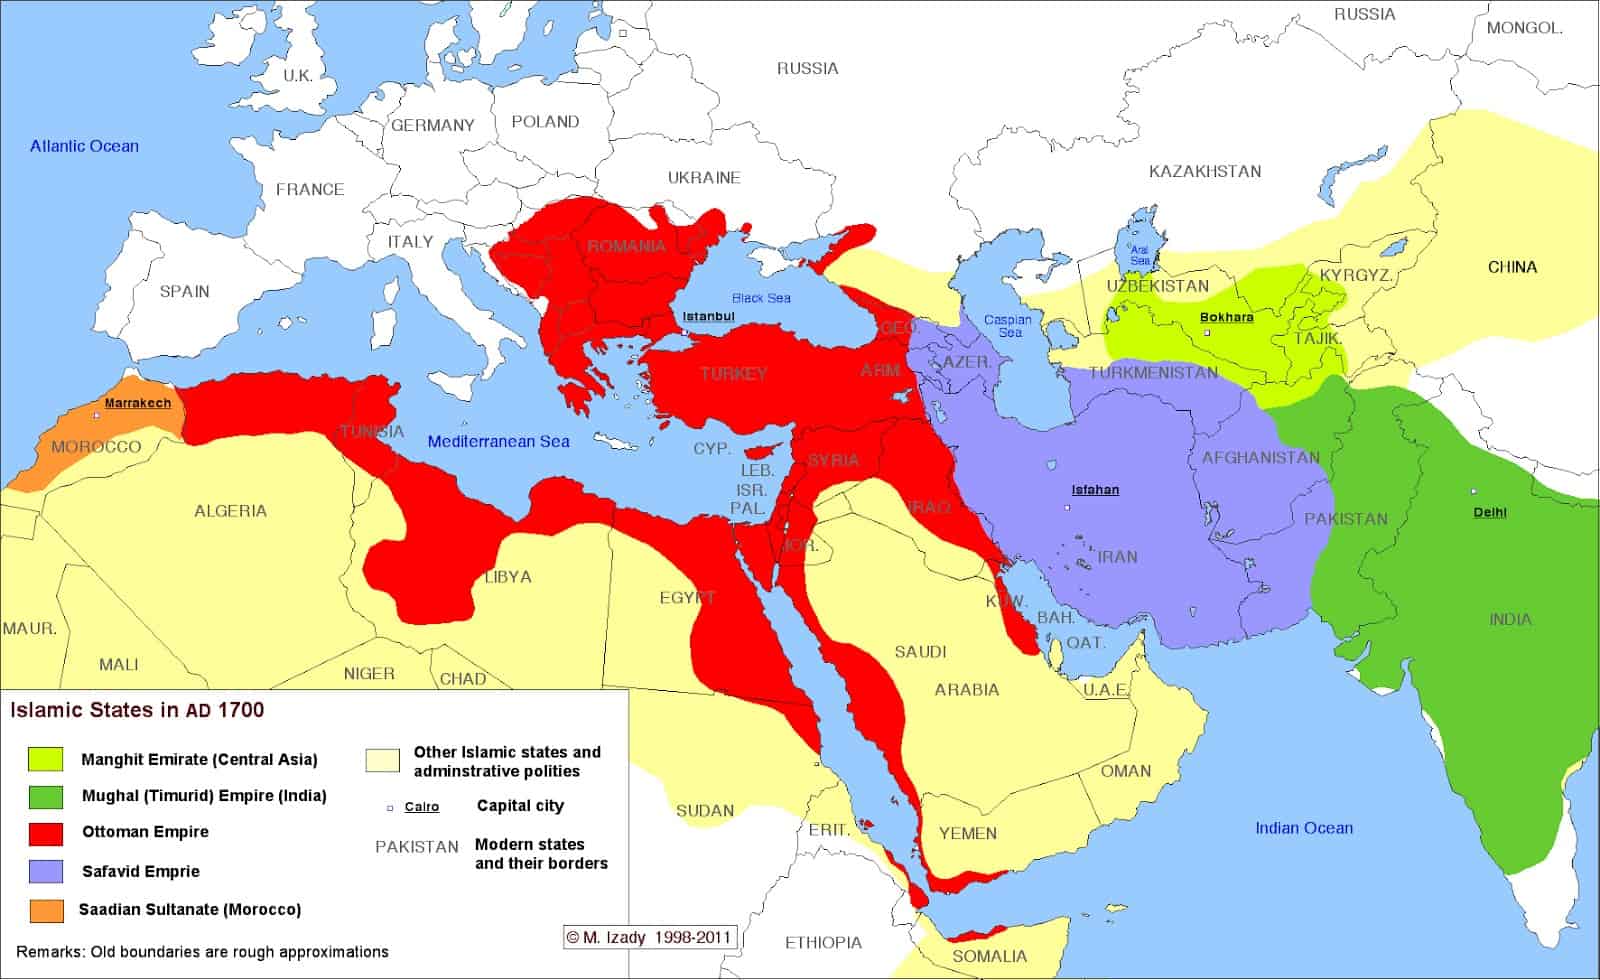 Muslim lands were traditionally autonomous provinces that were well suited to conduct their affairs when the need arose, and of course had their allegiance to the Caliph. Self-interested nation states (seen in the national borders) were superimposed much later, and are unable to address the problems of injustice we see today.